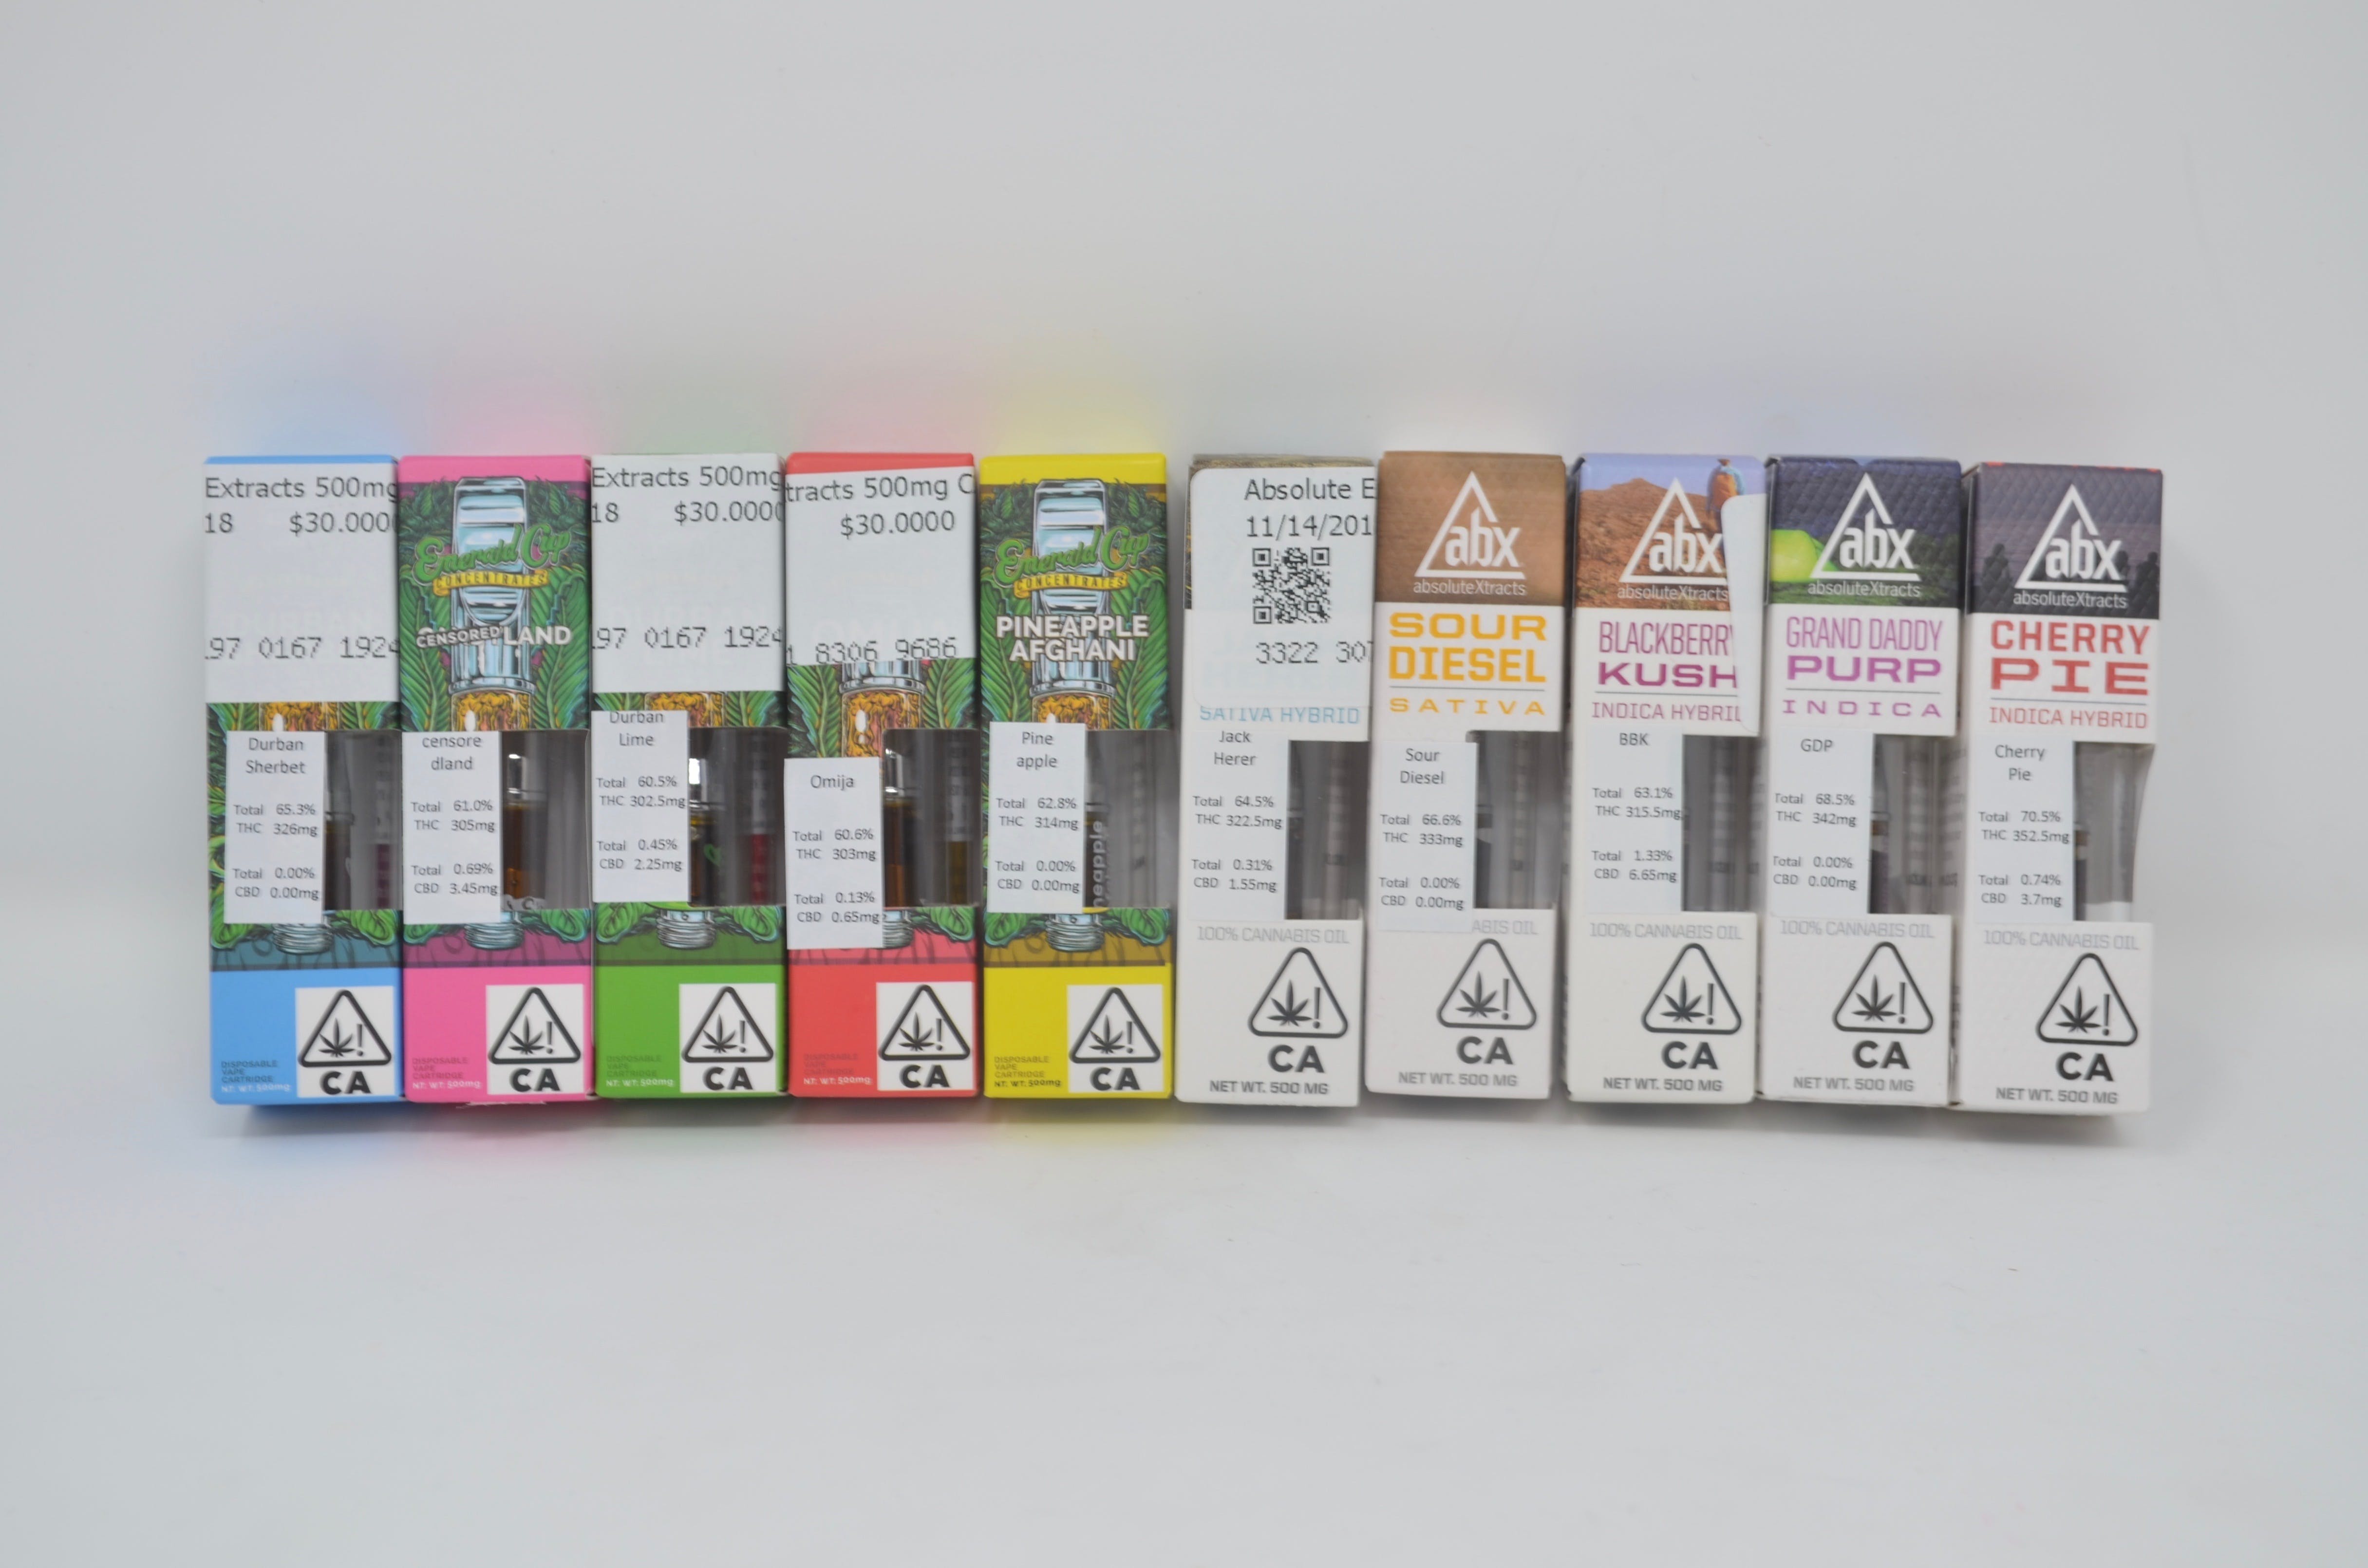 concentrate-absolutextracts-500mg-co2-oil-cartridge